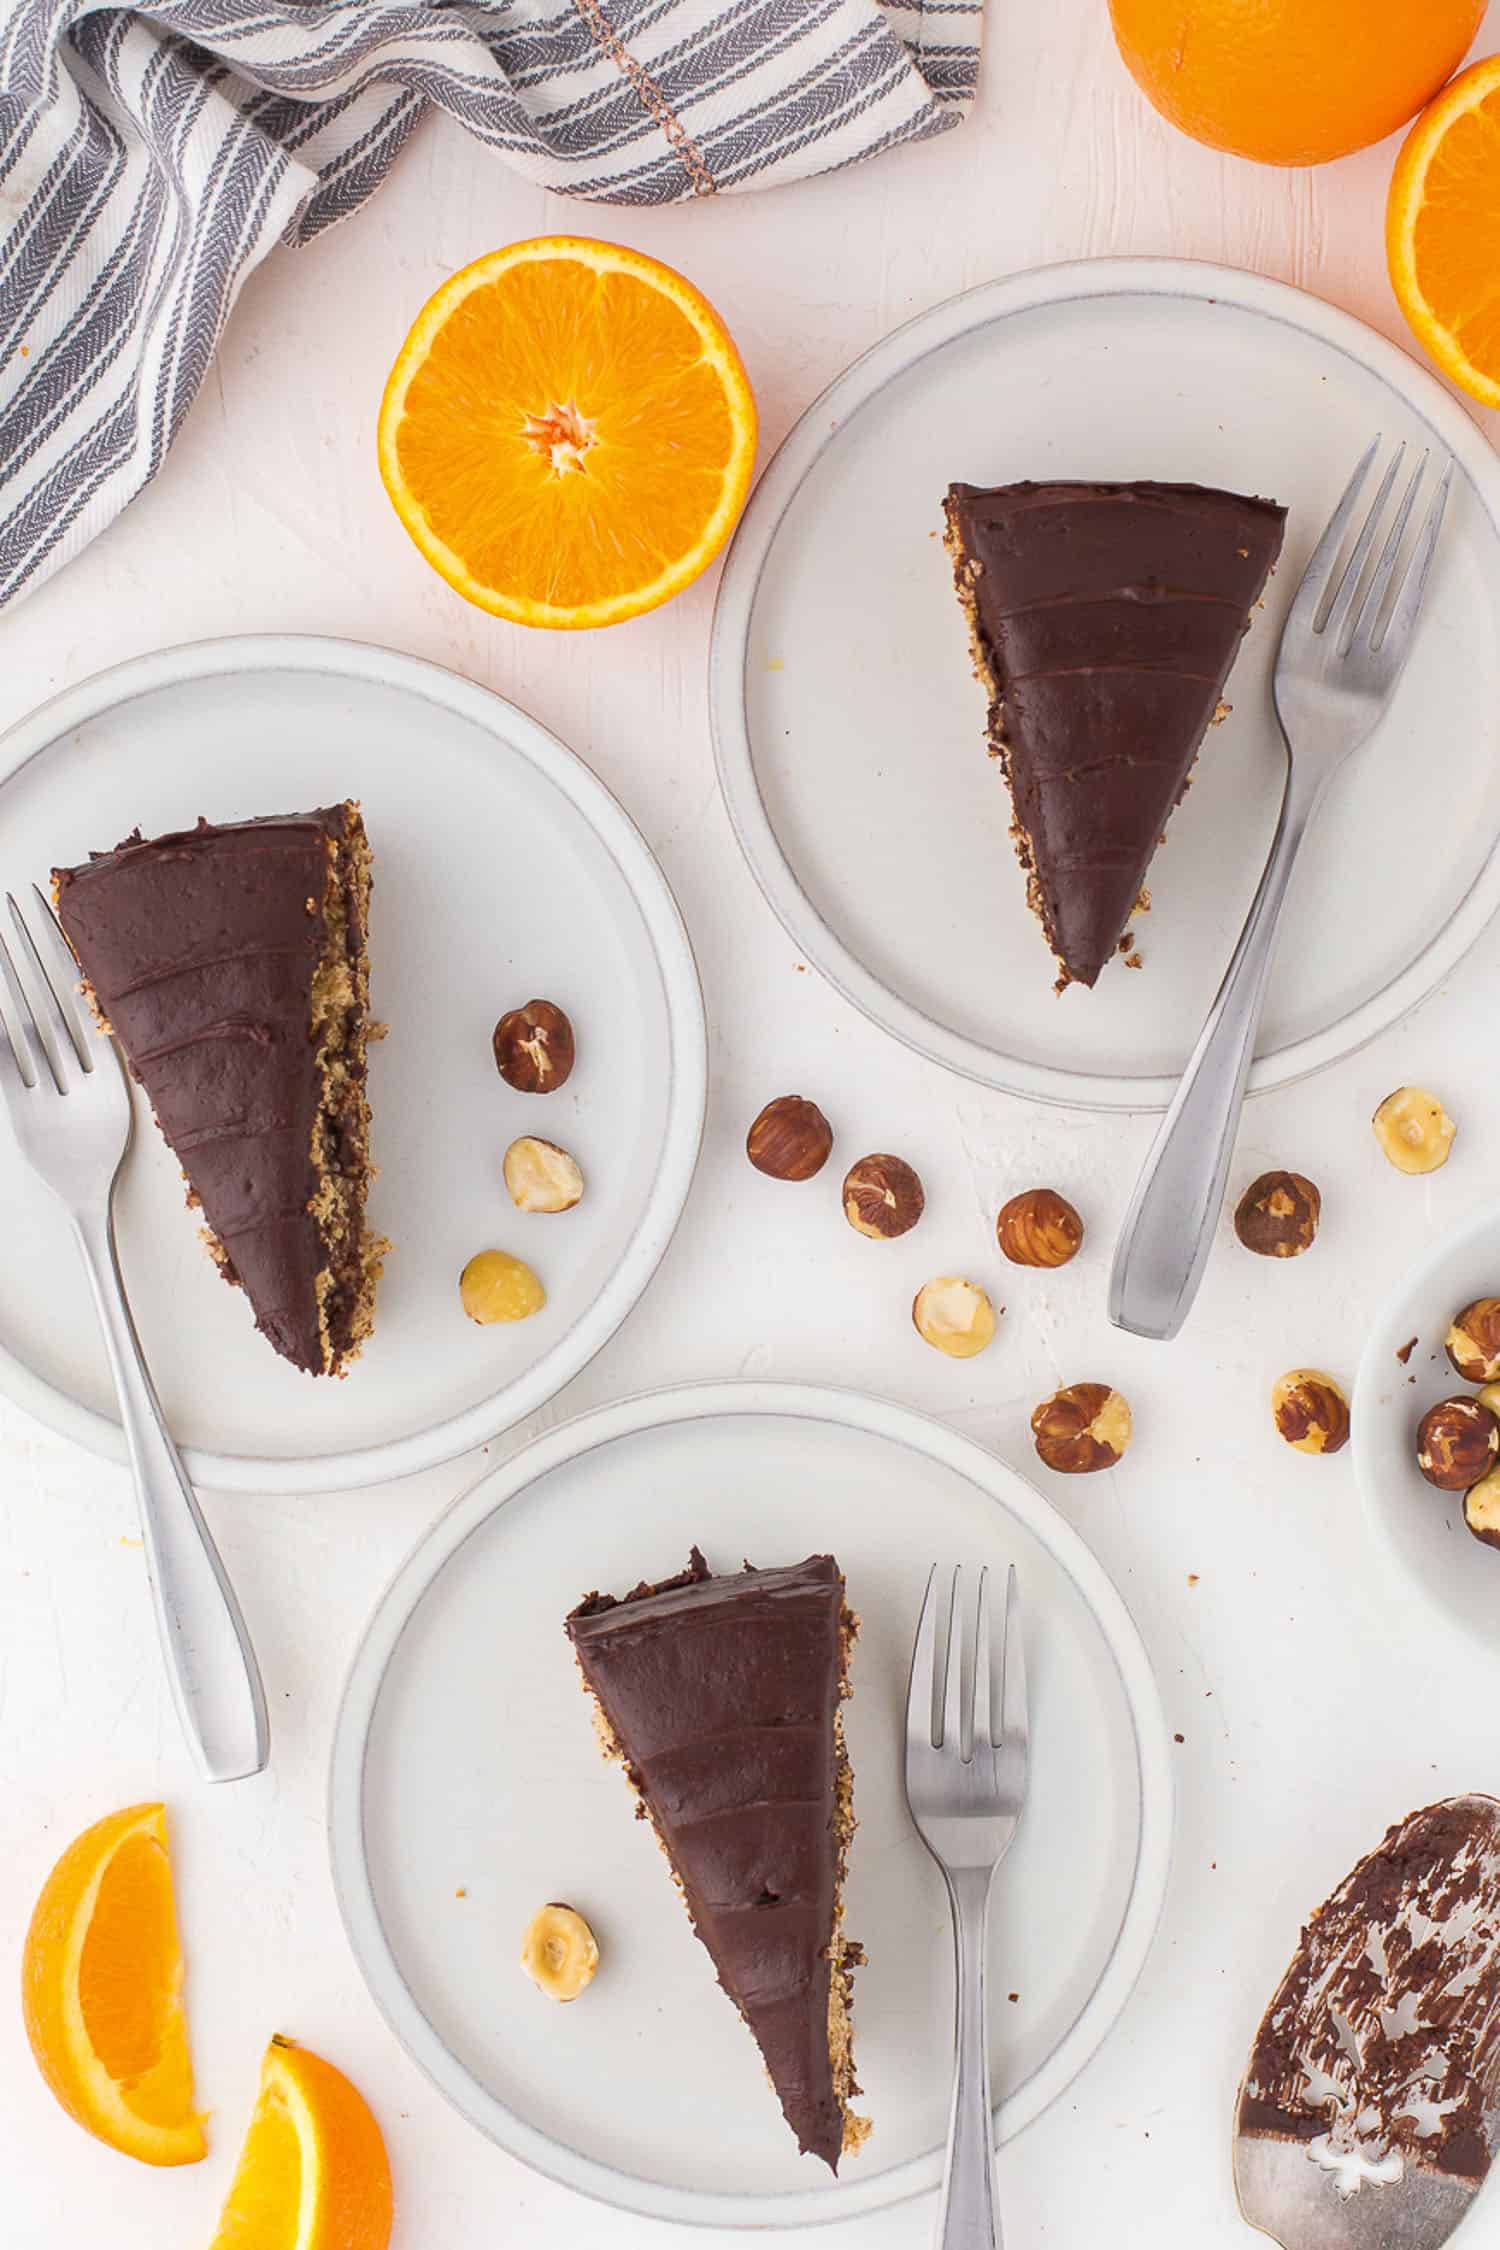 overview of 3 slices of chocolate hazelnut torte with orange slices on white background